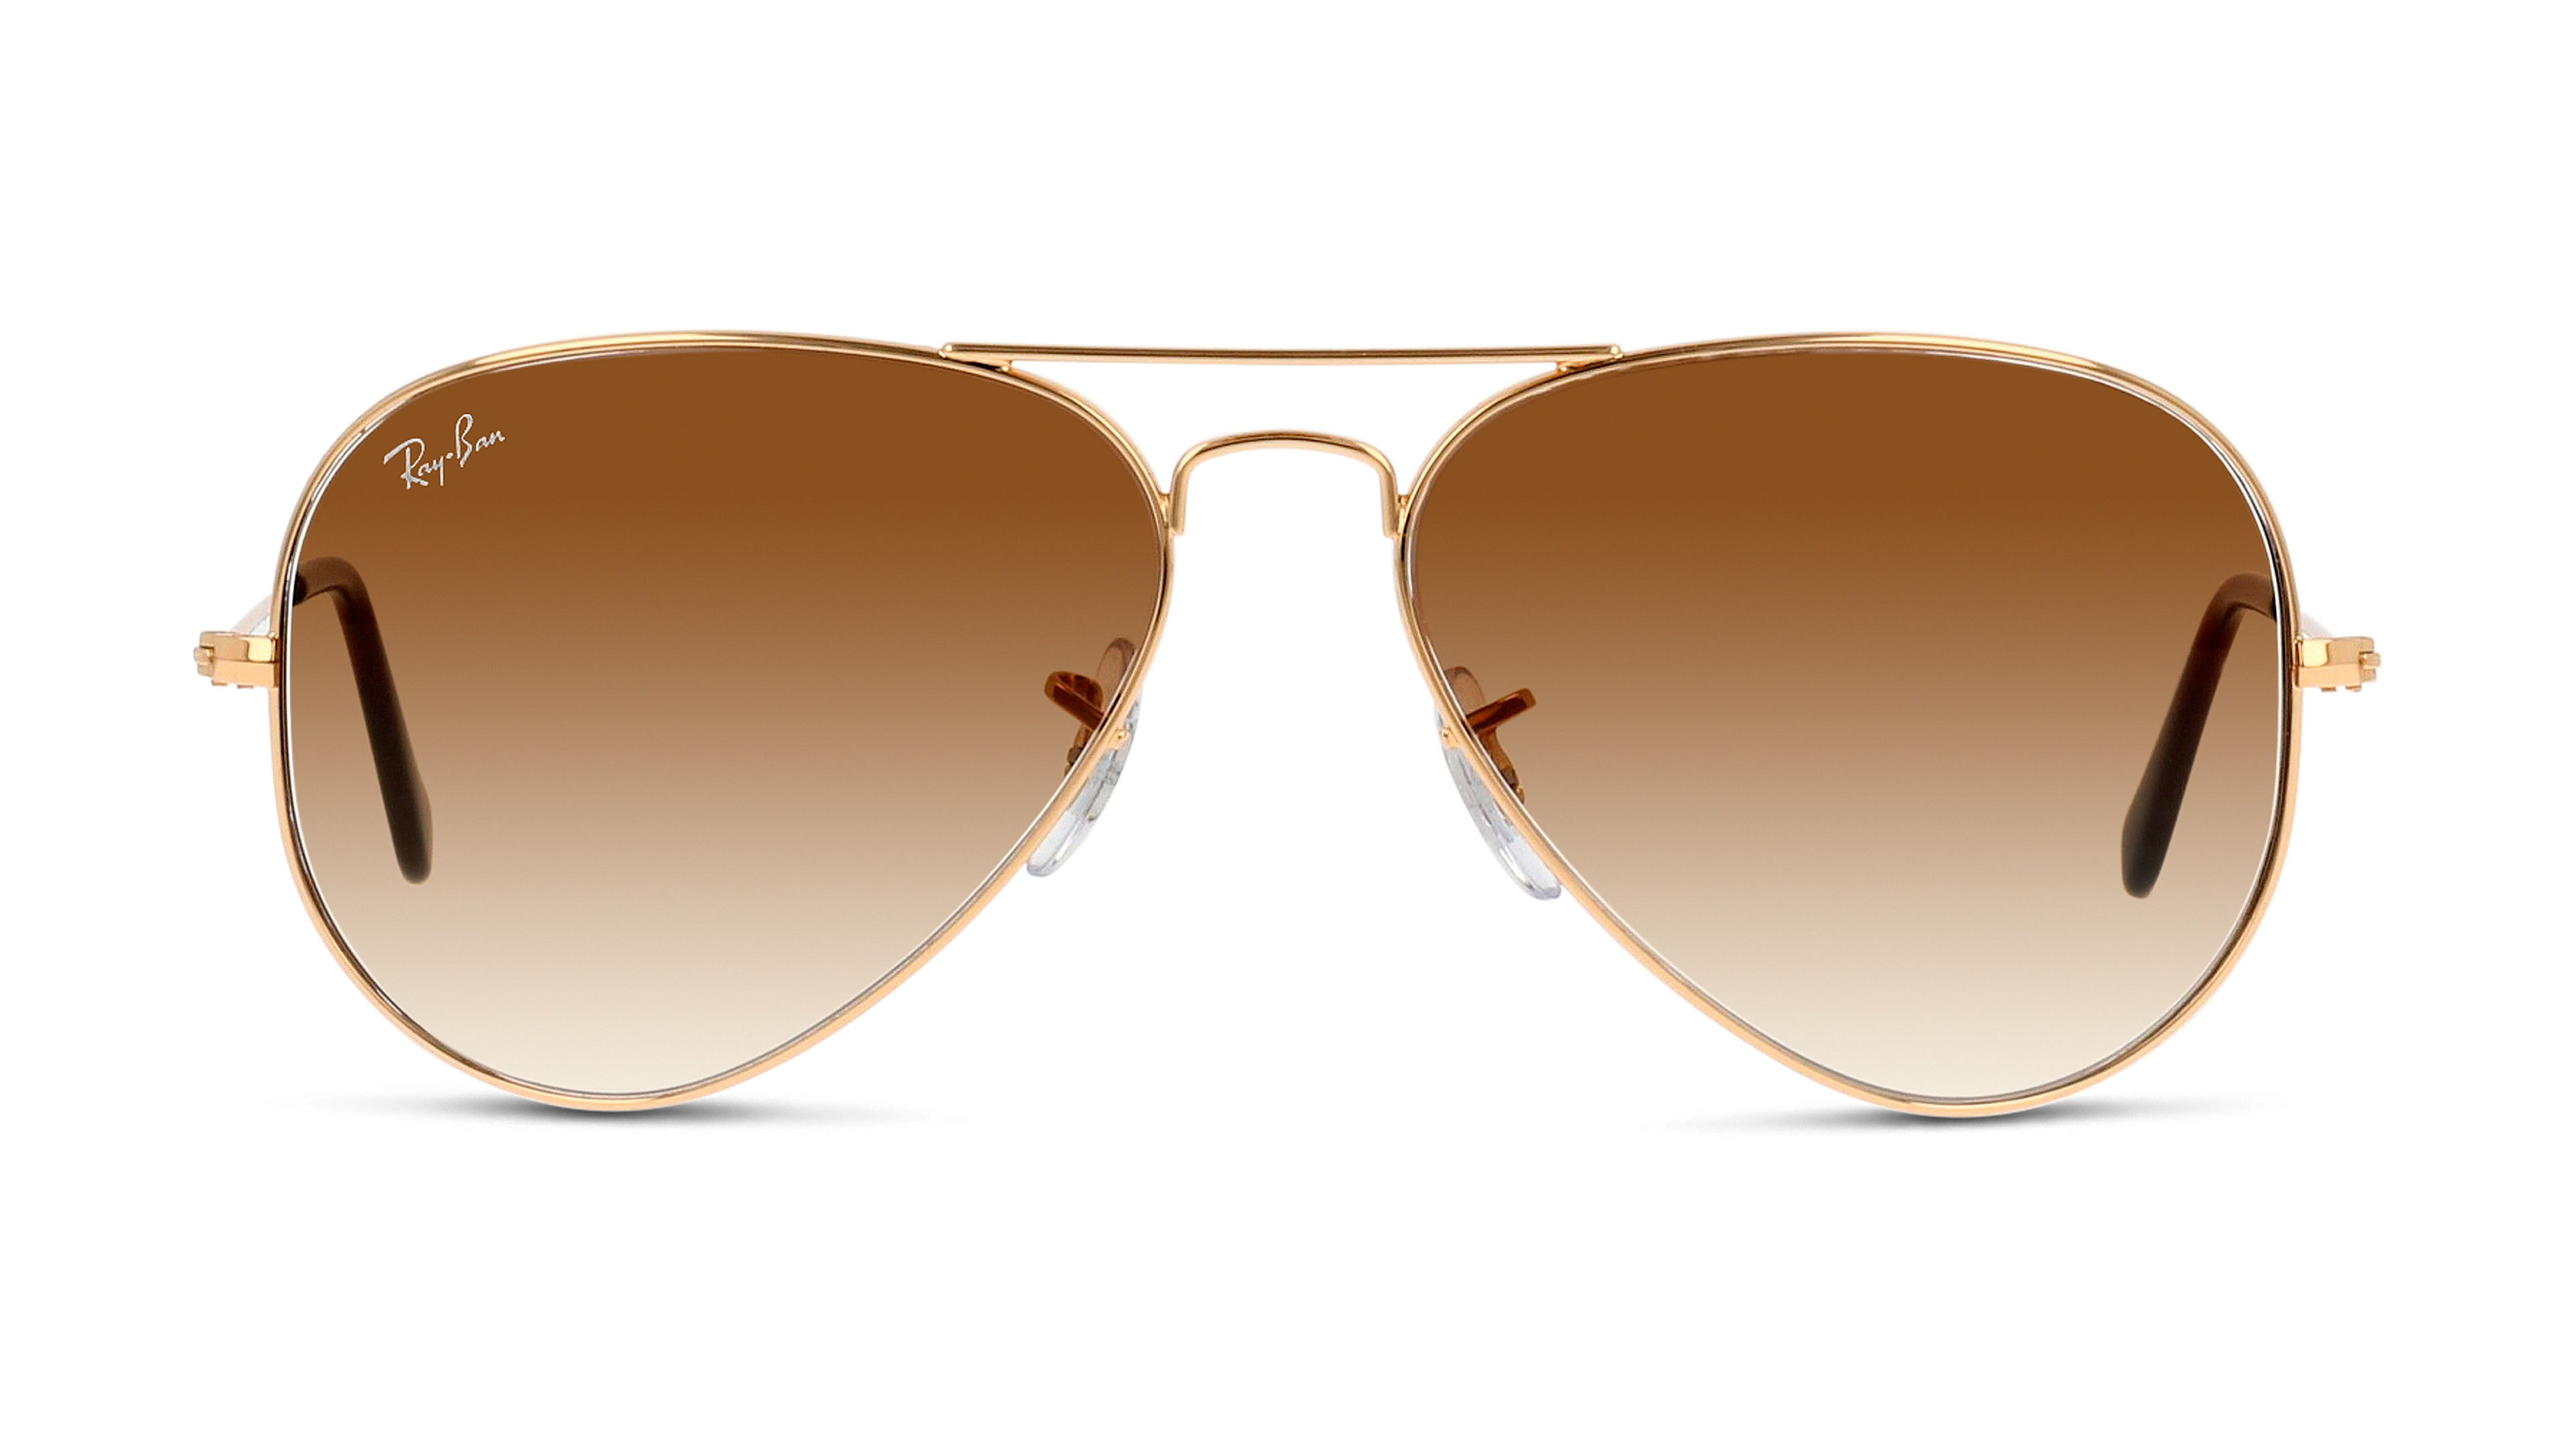 [products.image.front] Ray-Ban AVIATOR LARGE METAL 0RB3025 001/51 Sonnenbrille